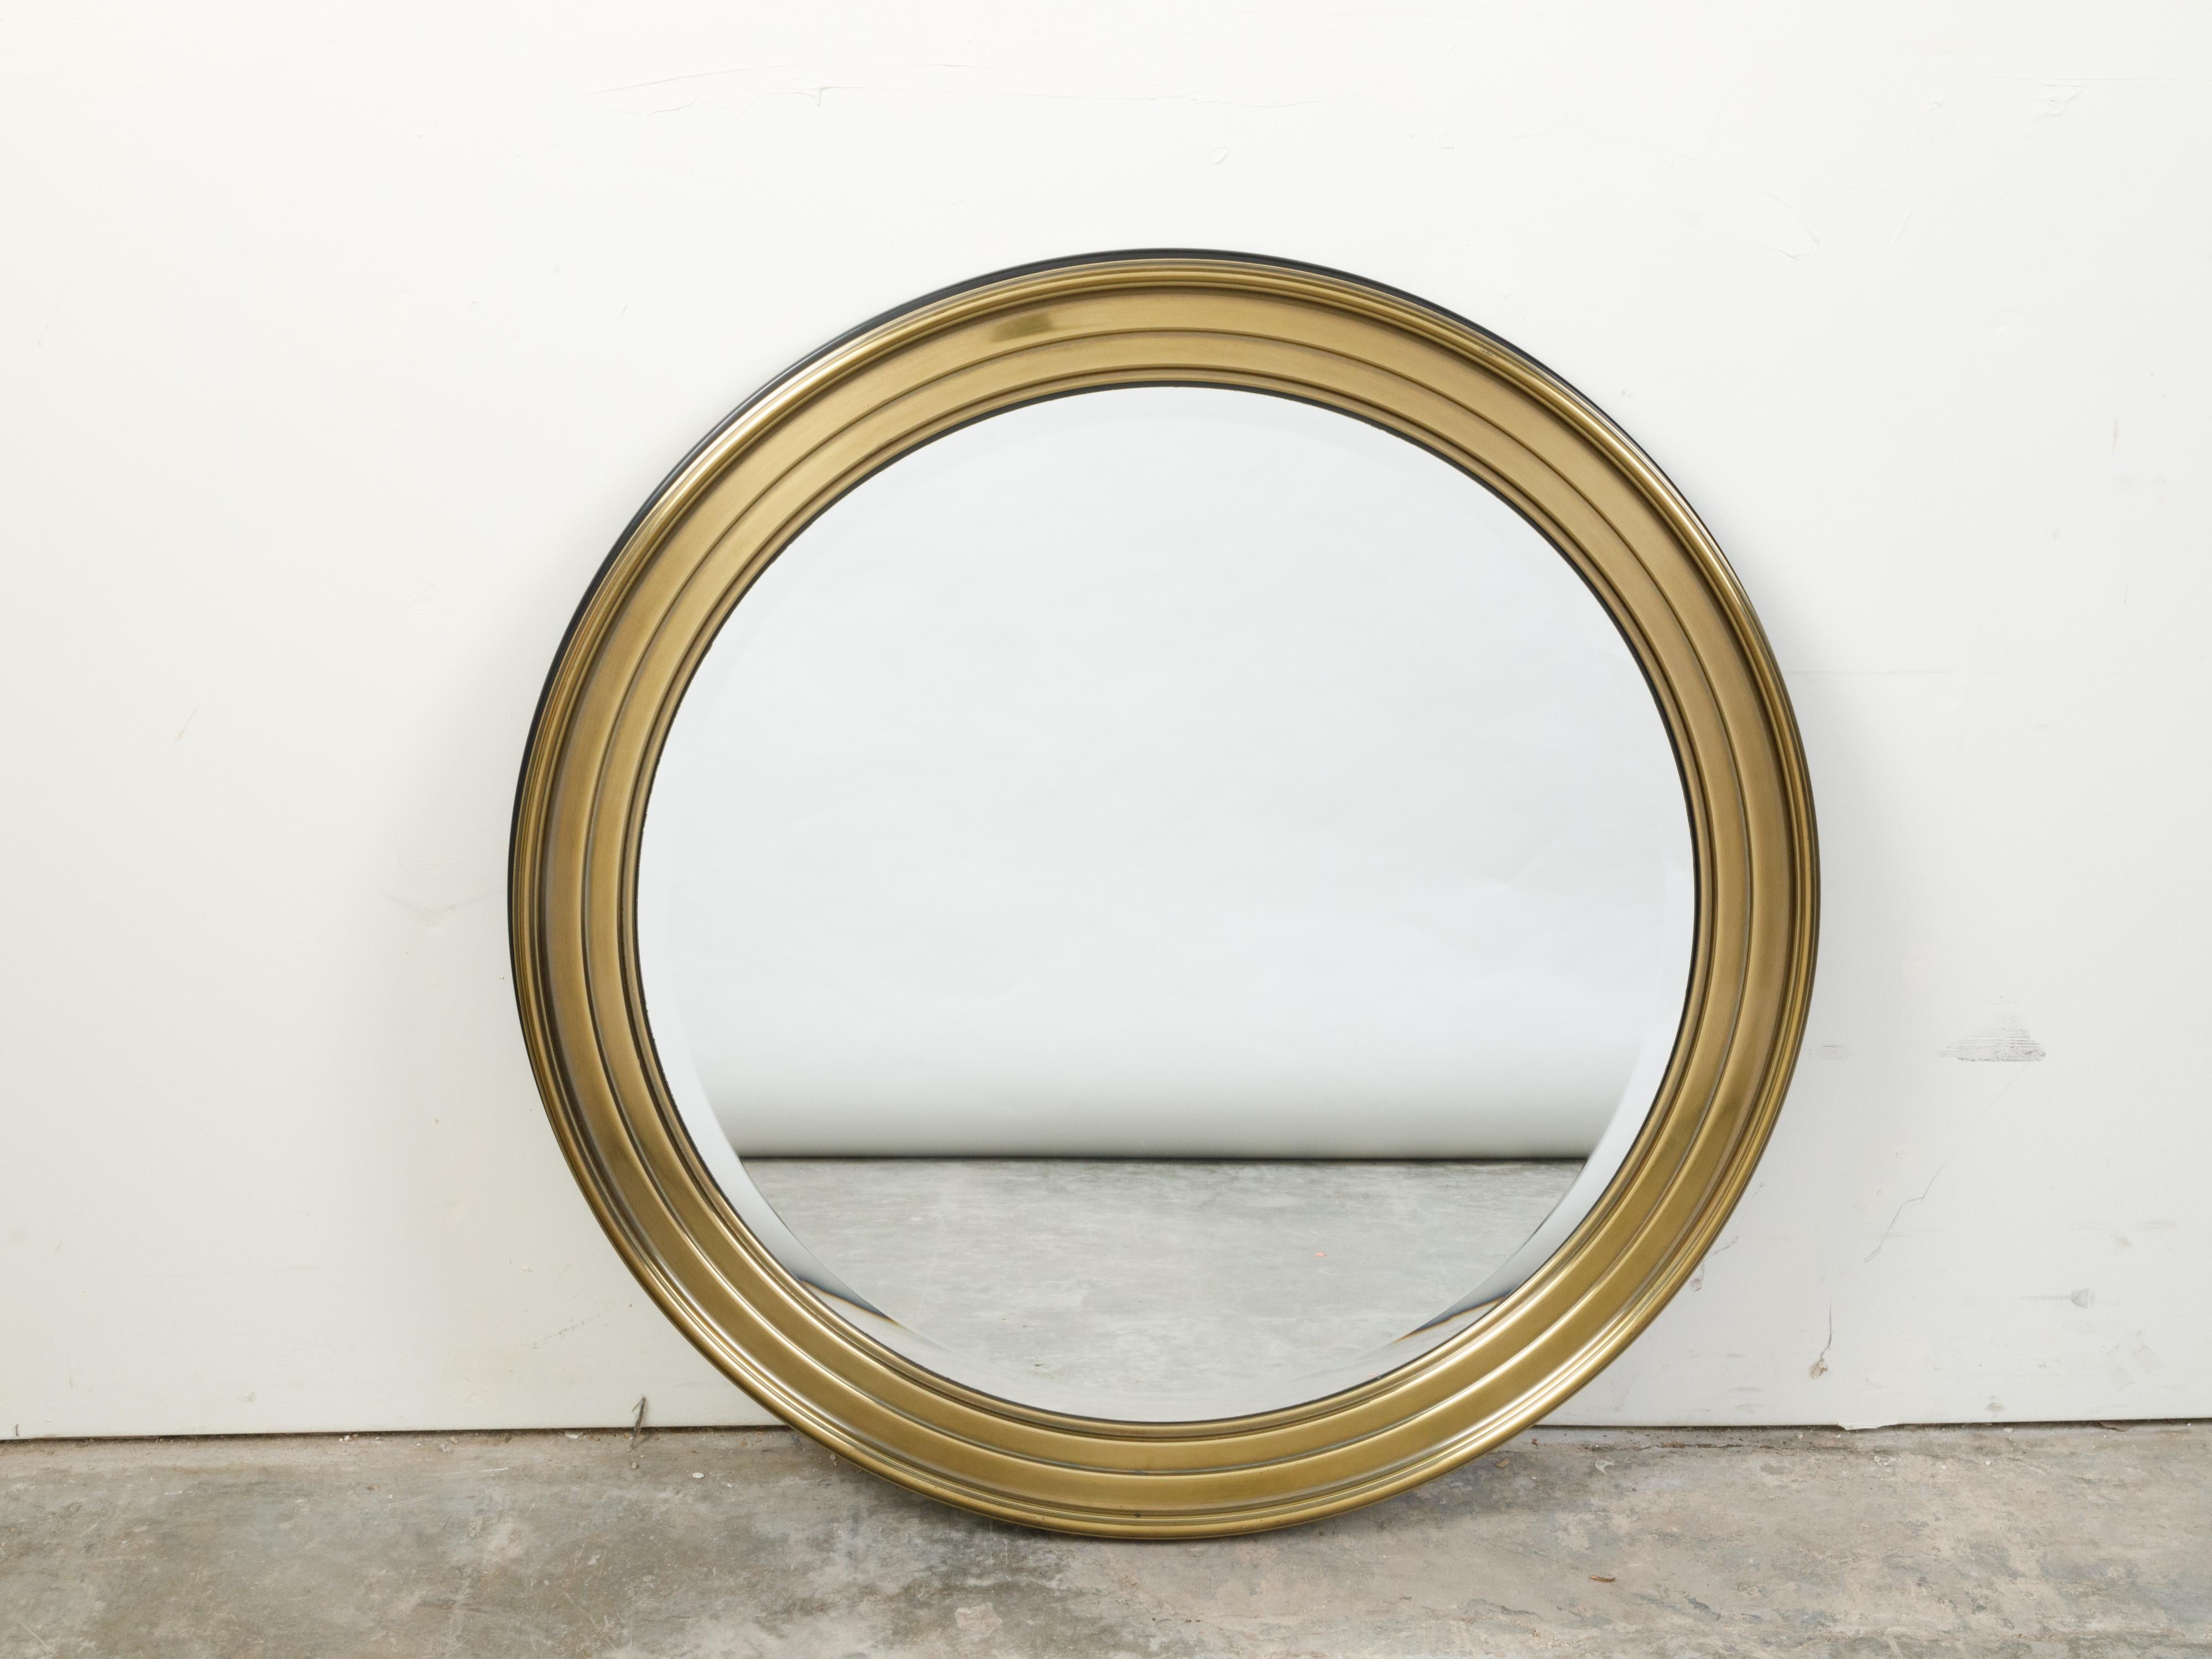 A French vintage brass round mirror from the mid 20th century, with beveled accents. Created in France during the midcentury period, this brass mirror features a circular frame with stepped accents, surrounding a mirror plate with beveled edge. With